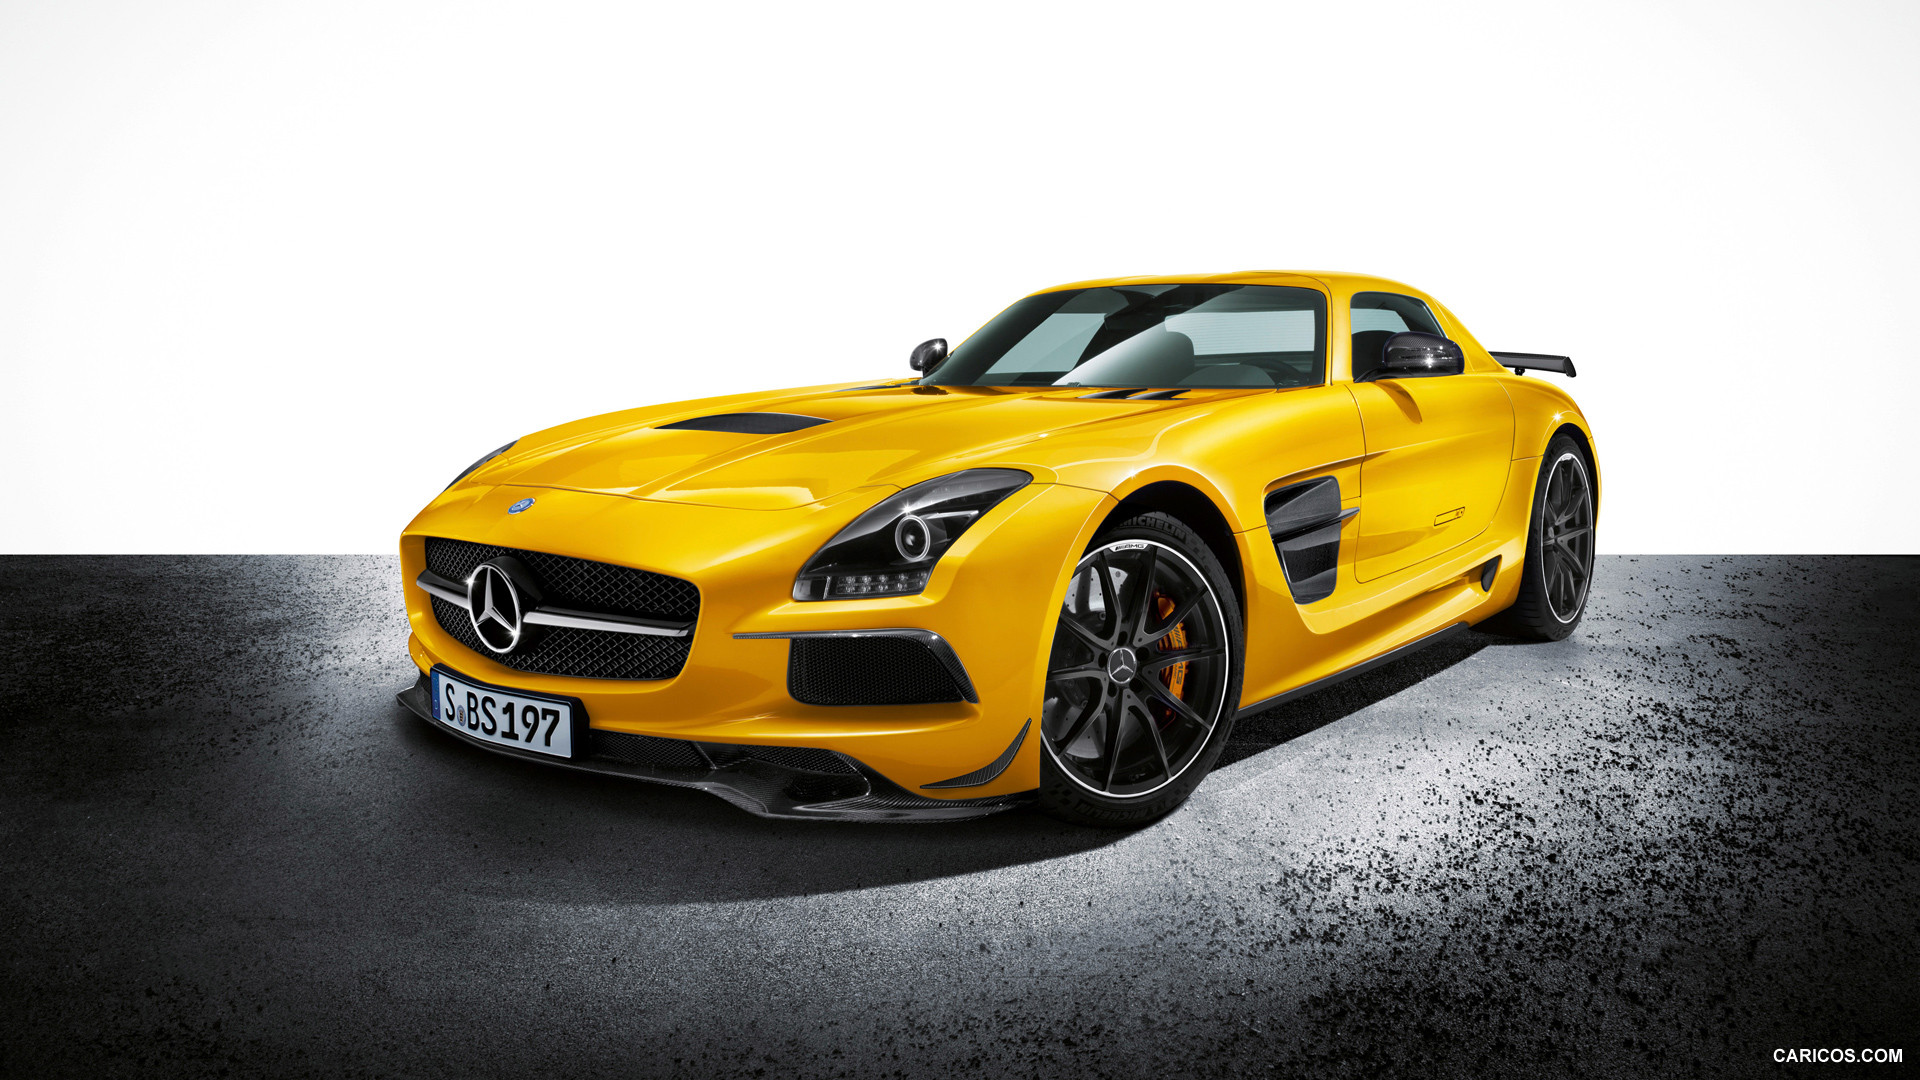 2014 Mercedes-Benz SLS AMG Coupe Black Series Solarbeam - Front, #14 of 40